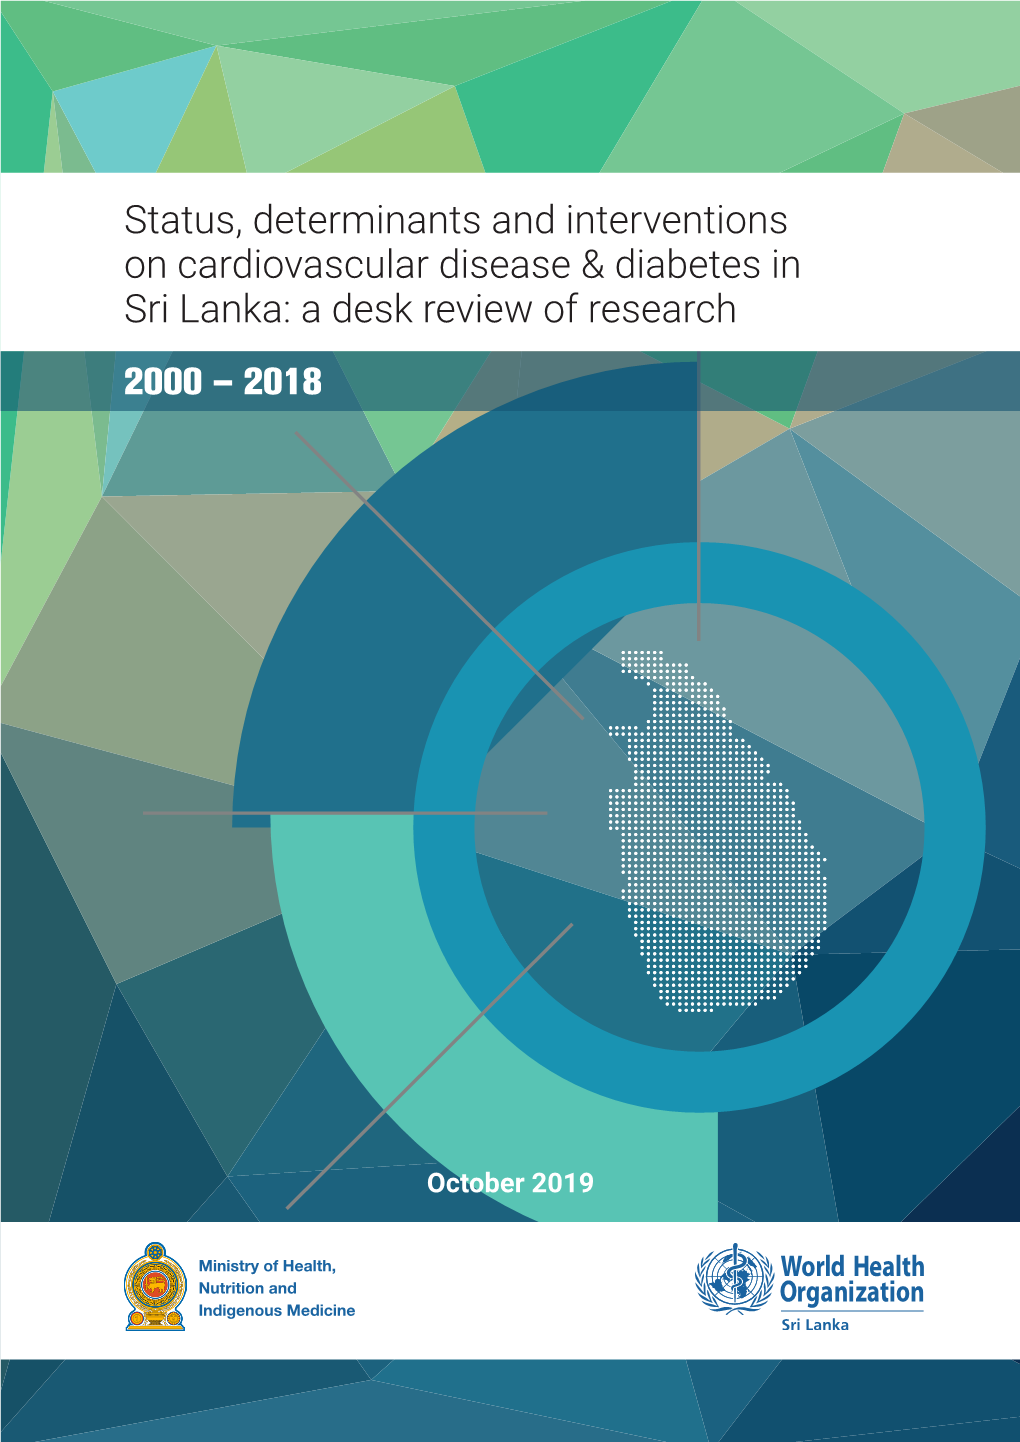 Status, Determinants and Interventions on Cardiovascular Disease & Diabetes in Sri Lanka: a Desk Review of Research 2000 – 2018